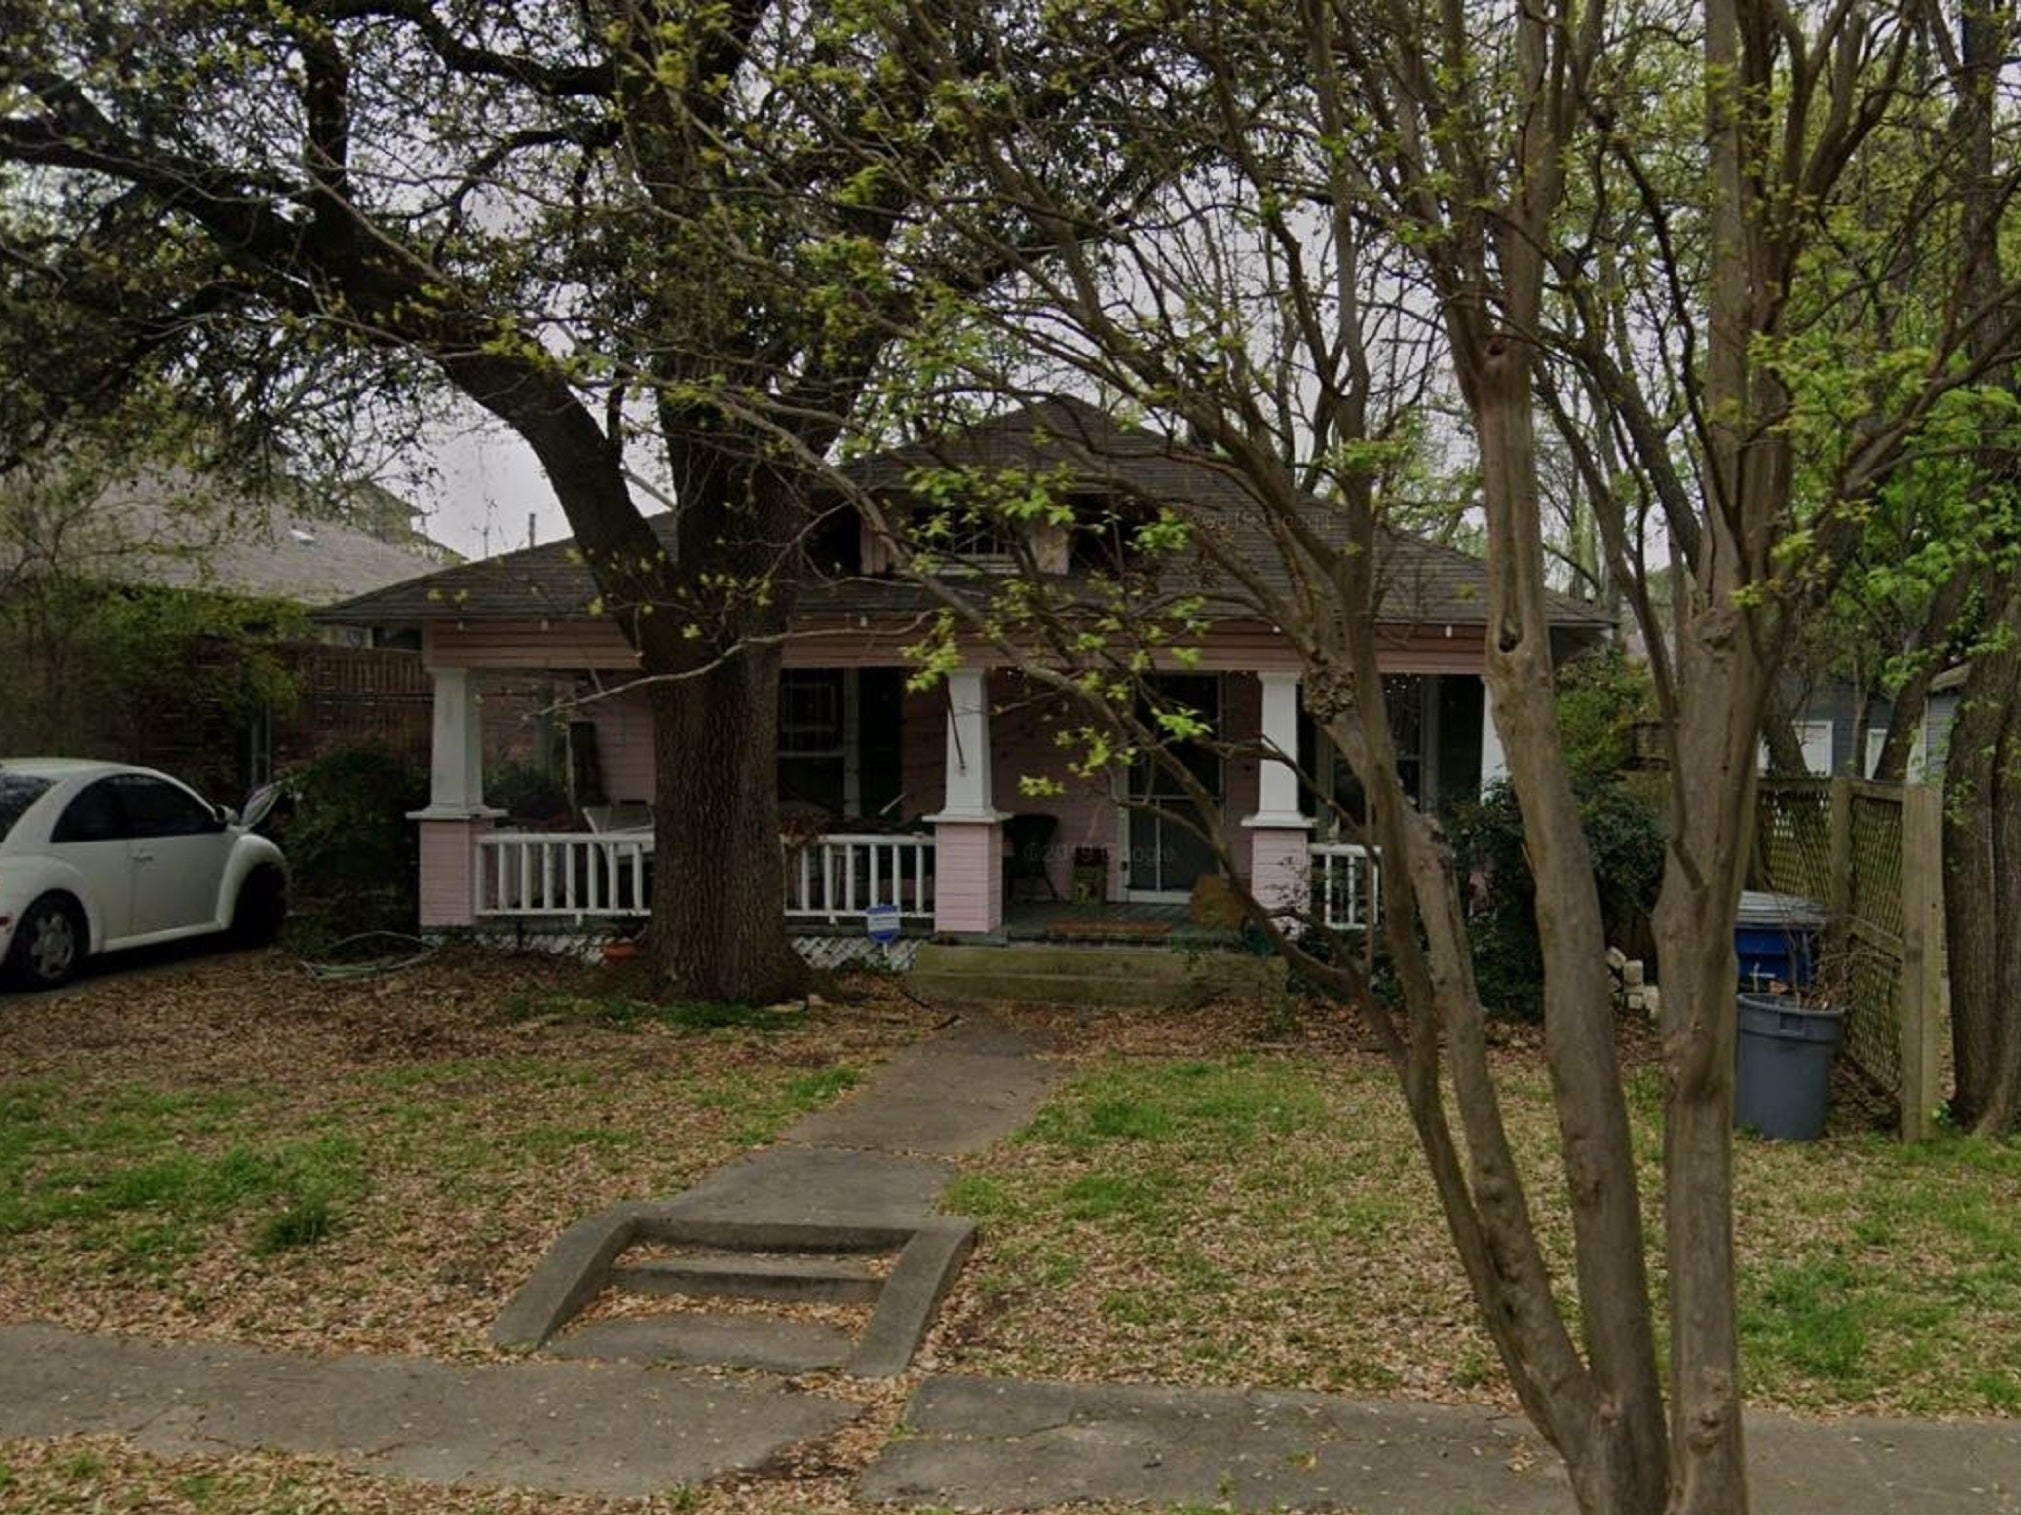 Google street view image from April 2019 of a 97-year-old house in the historic neighbourhood of Vickory Place, Dallas, US, which was accidentally demolished instead of another house.